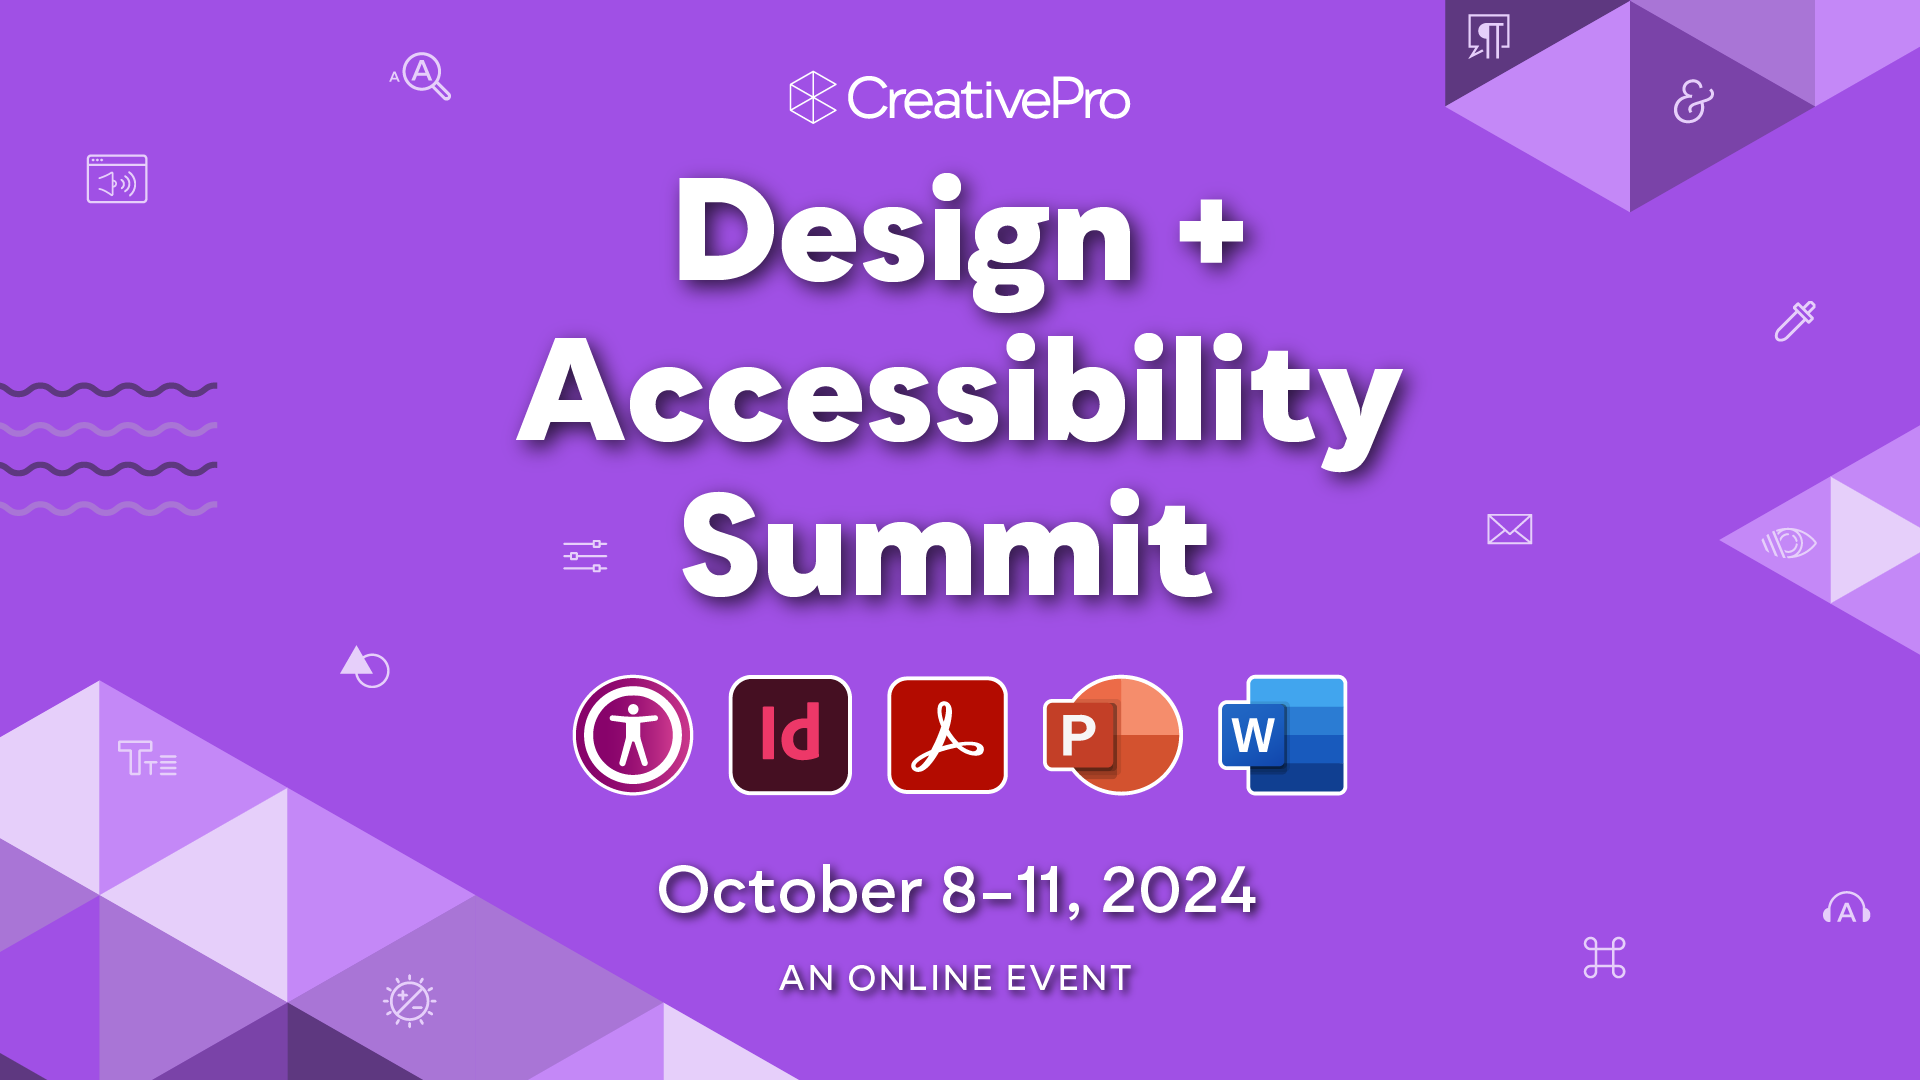 The Design + Accessibility Summit, A CreativePro Online Event, October 8–11, 2024